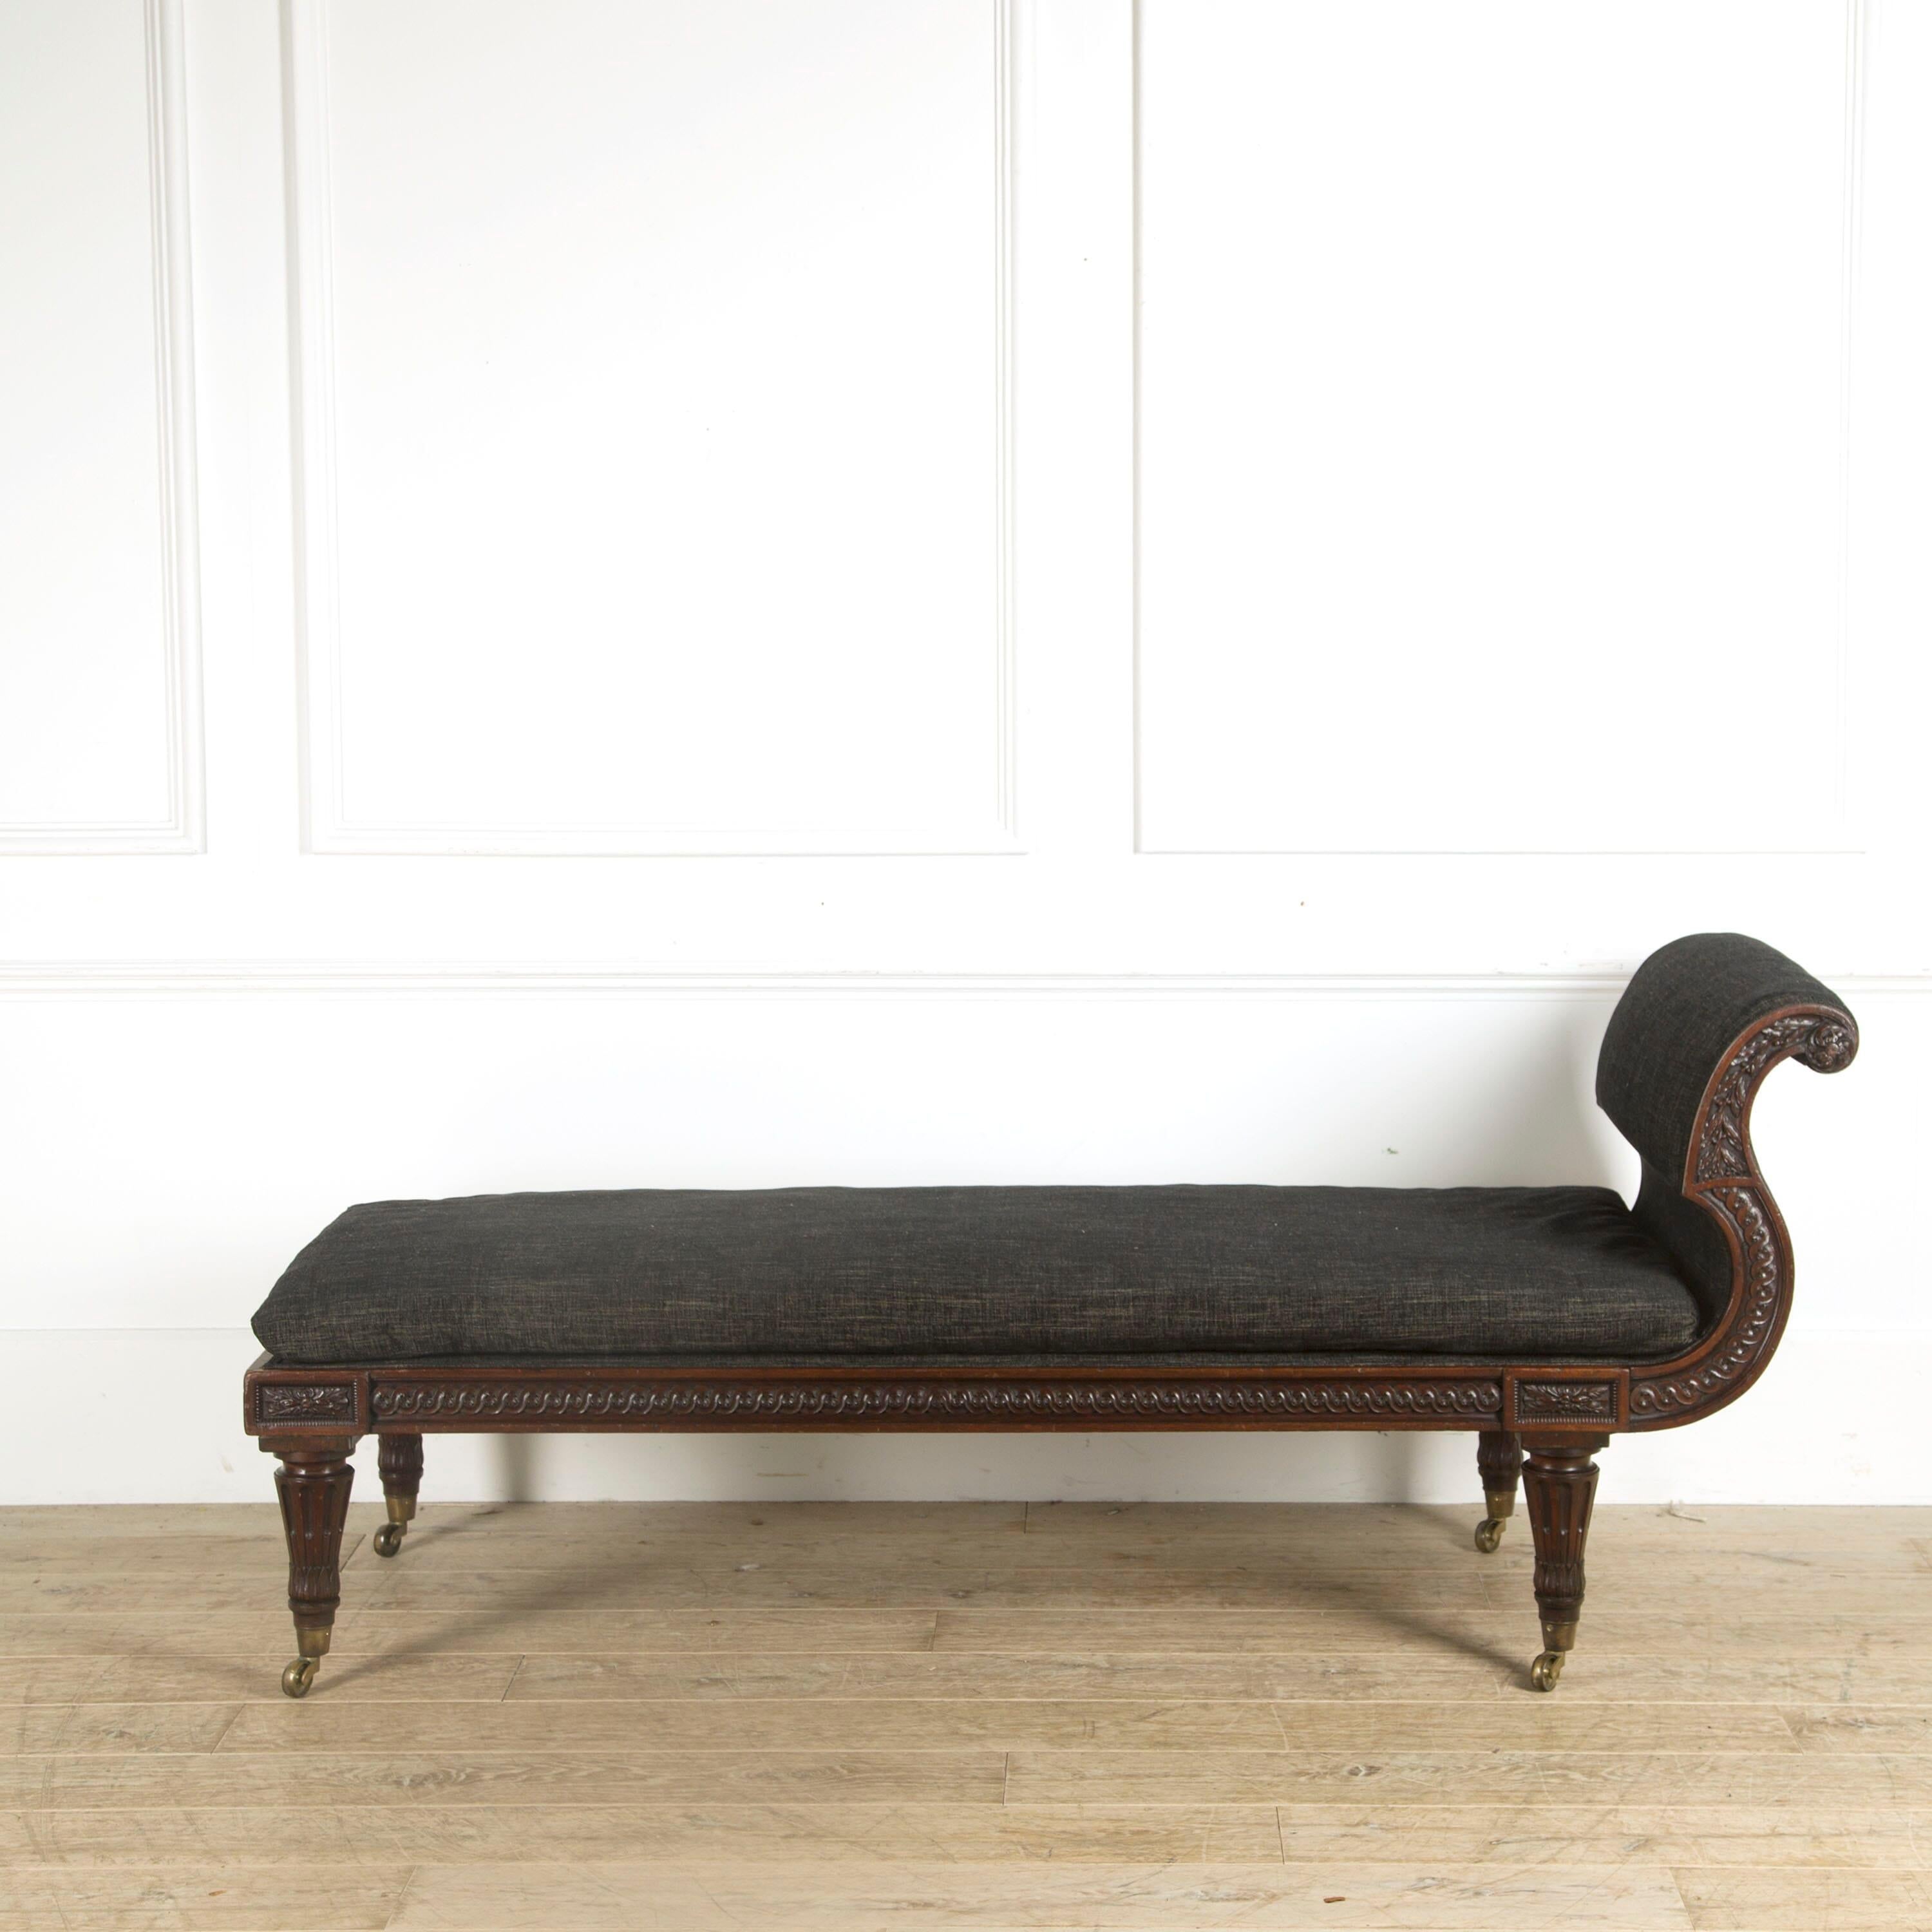 A handsome and finely carved French mahogany daybed, stamped JACOB. Paris circa, 1810.